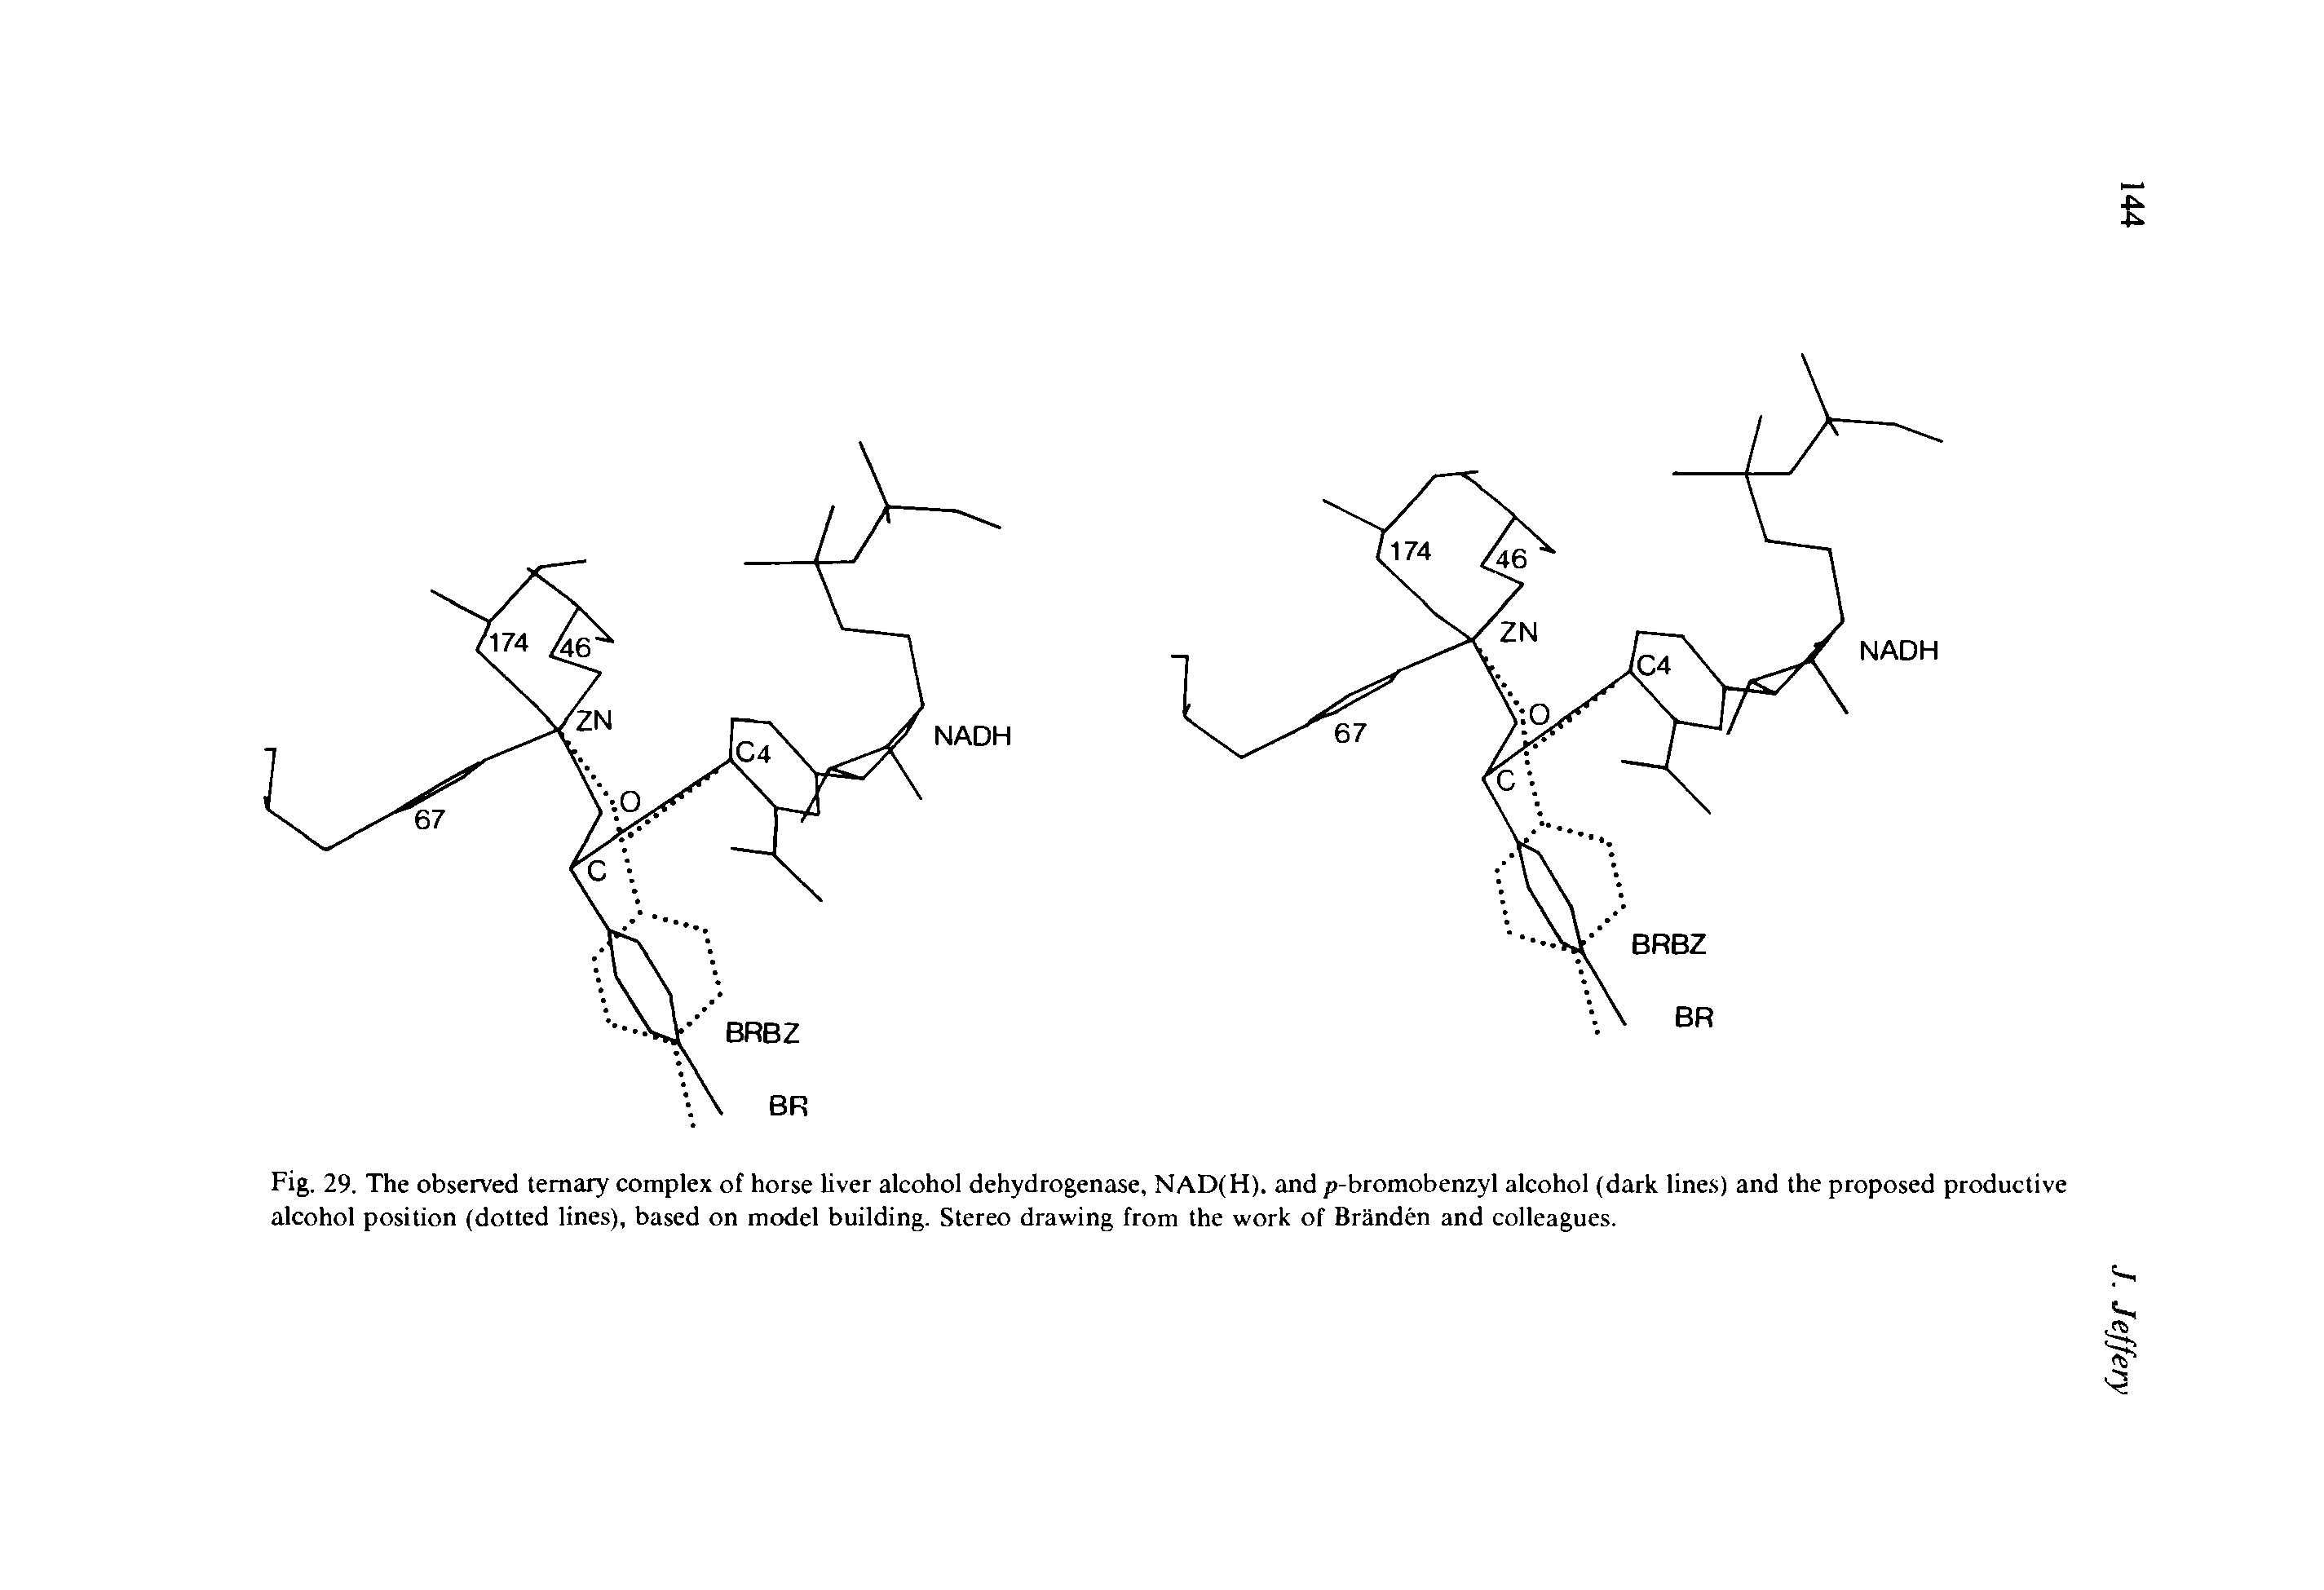 Fig. 29. The observed ternary complex of horse liver alcohol dehydrogenase, NAD(H). and p-bromobenzyl alcohol (dark lines) and the proposed productive alcohol position (dotted lines), based on model building. Stereo drawing from the work of Branden and colleagues.